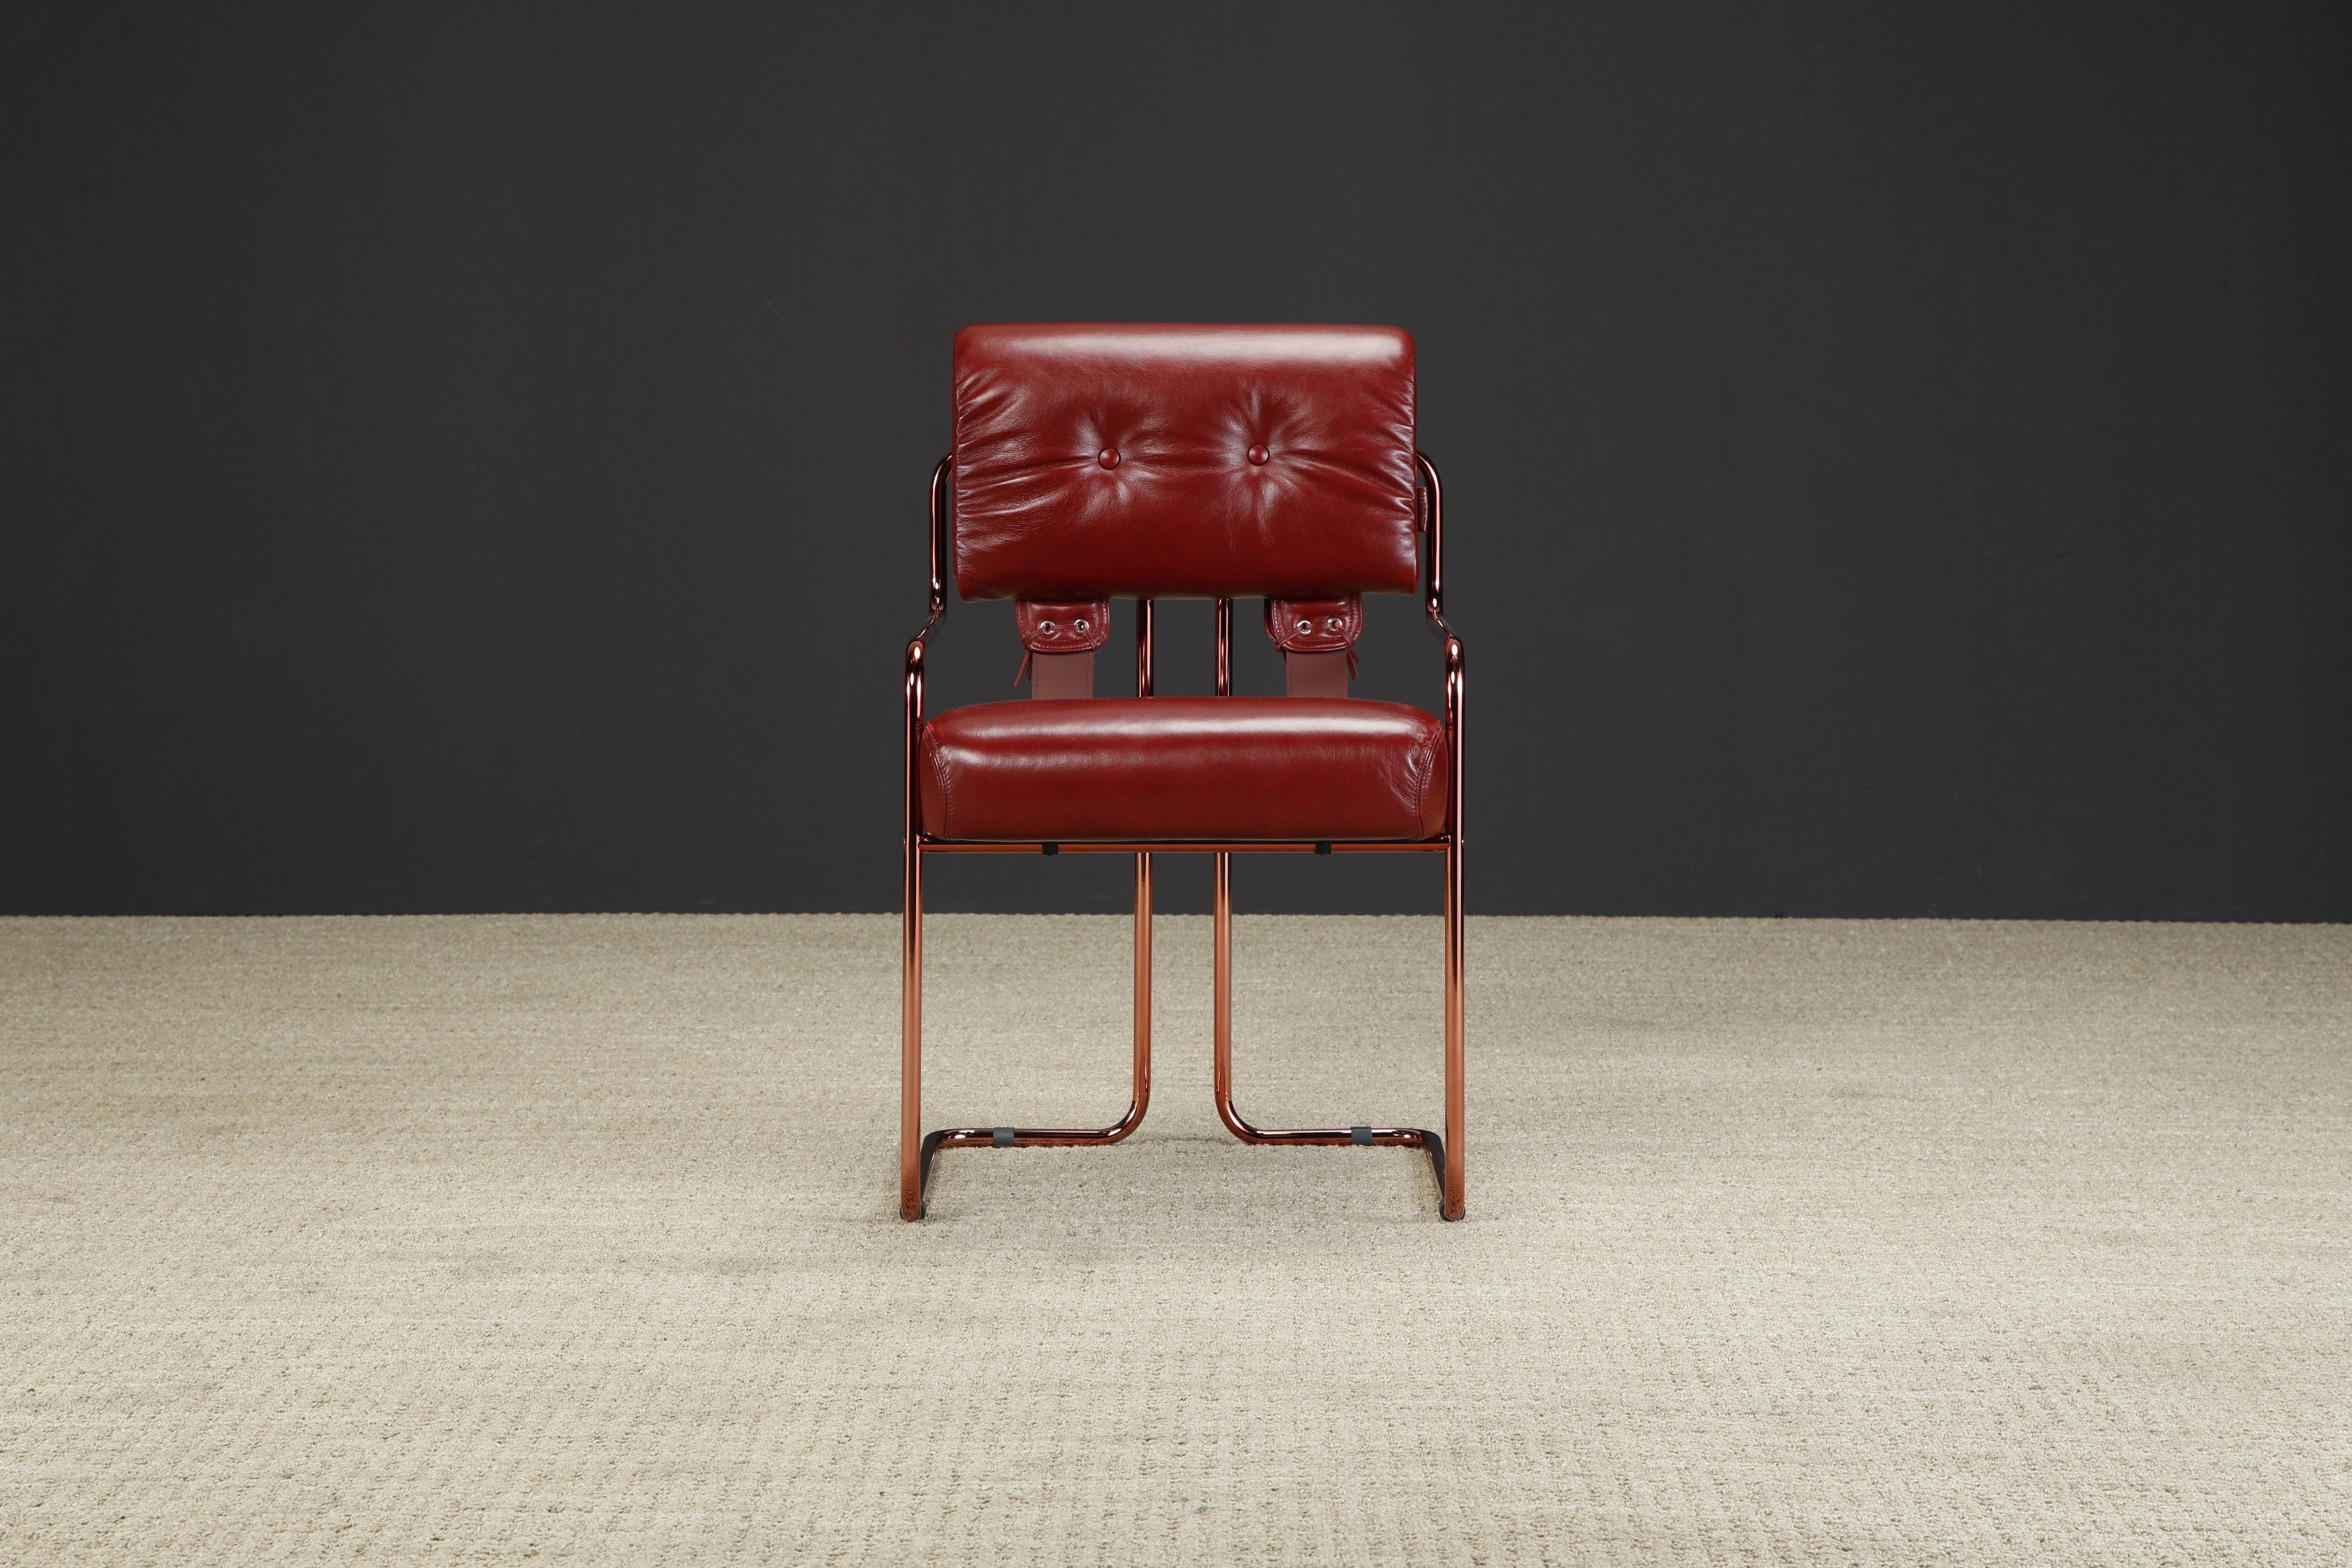 Currently, the most coveted dining chairs by interior designers are 'Tucroma' chairs by Guido Faleschini for i4 Mariani, and we have this incredible Tucroma armchair in beautiful deep red, almost burgundy, leather with polished red tinted frames